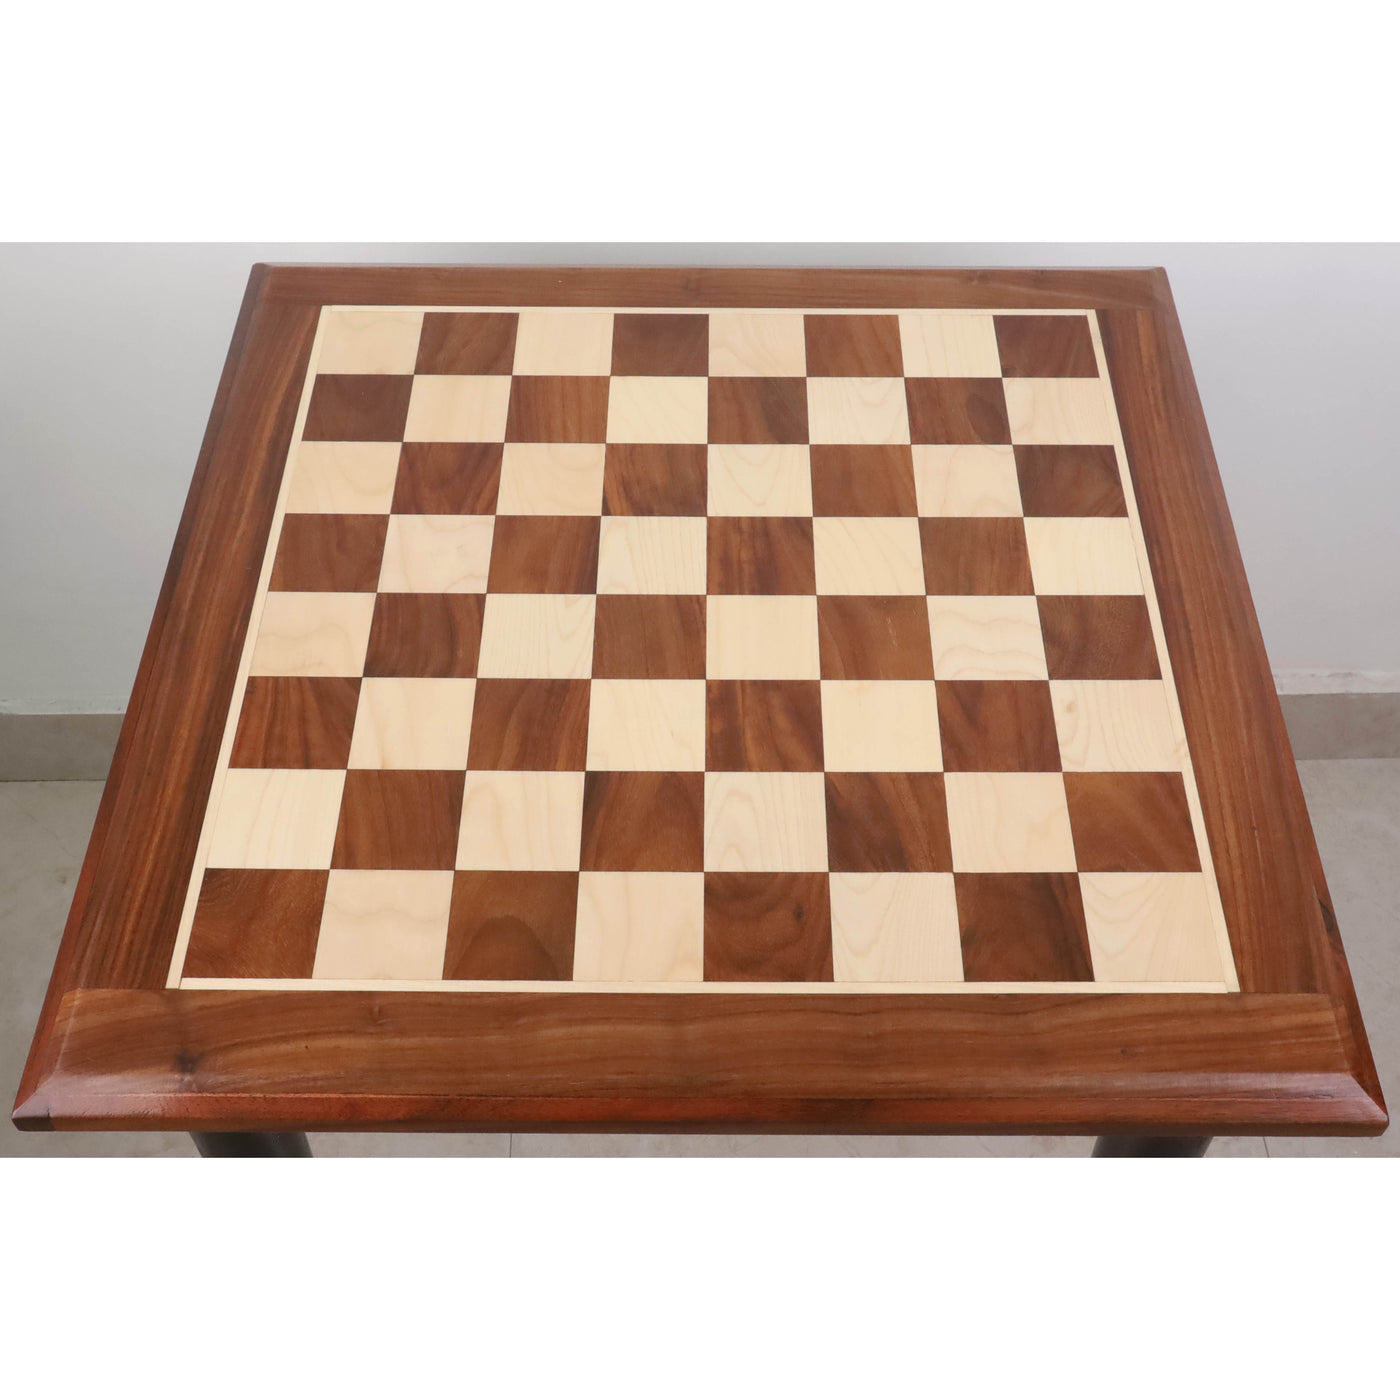 22" Tournament Chess Board Table with Stoppers - 26" Height - Golden Rosewood